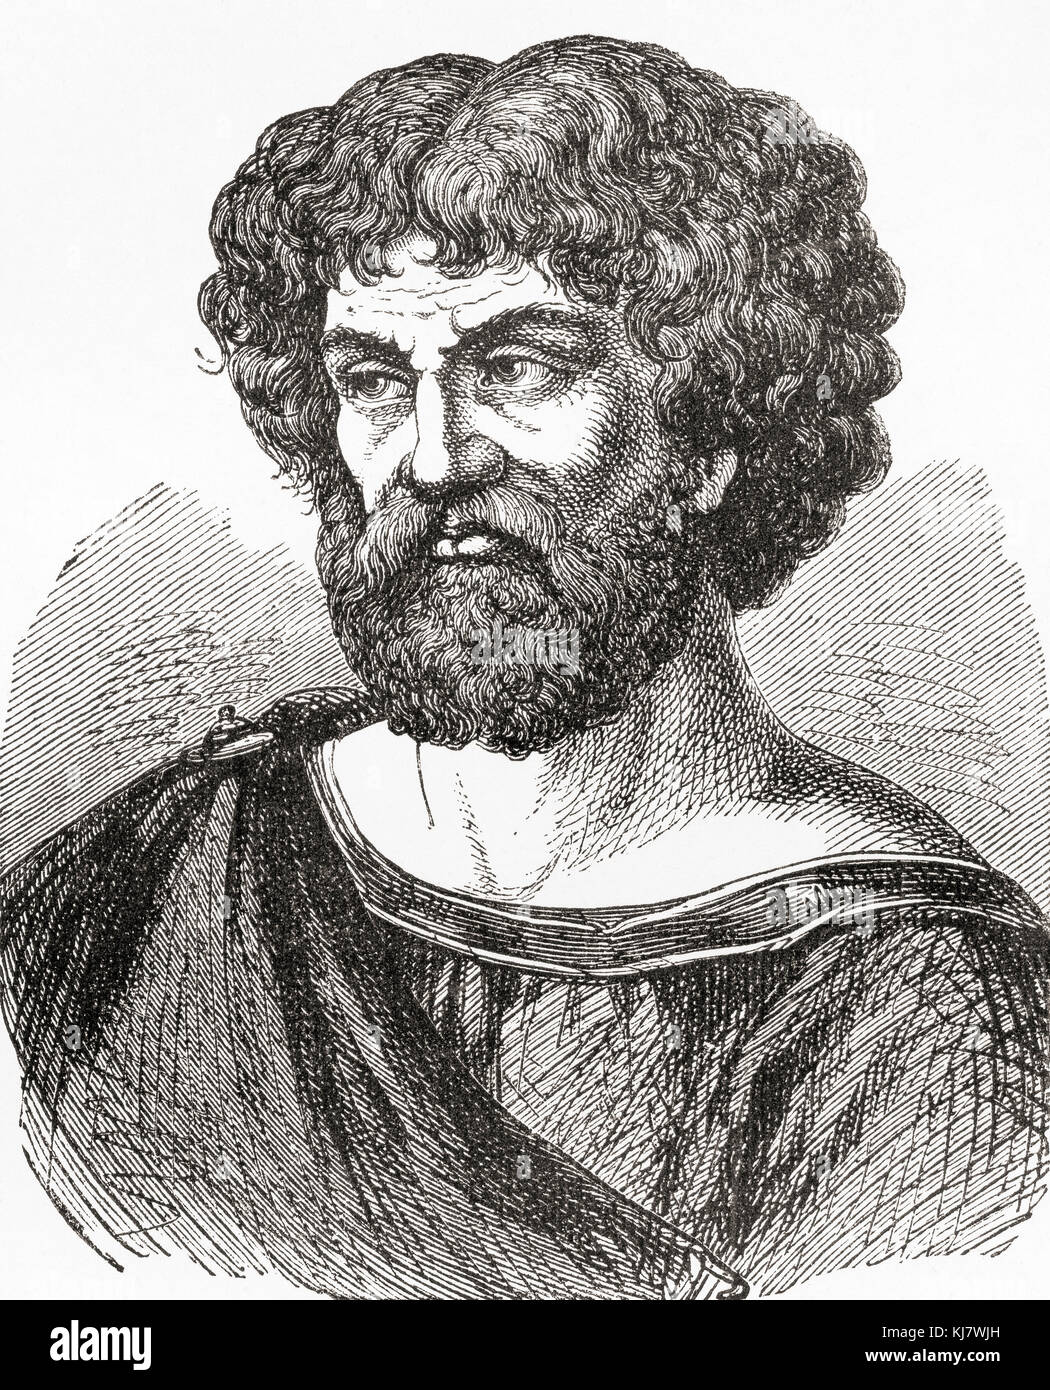 Hannibal Barca, 247 – c. 183/181 BC.  Carthaginian general.  From Ward and Lock's Illustrated History of the World, published c.1882. Stock Photo